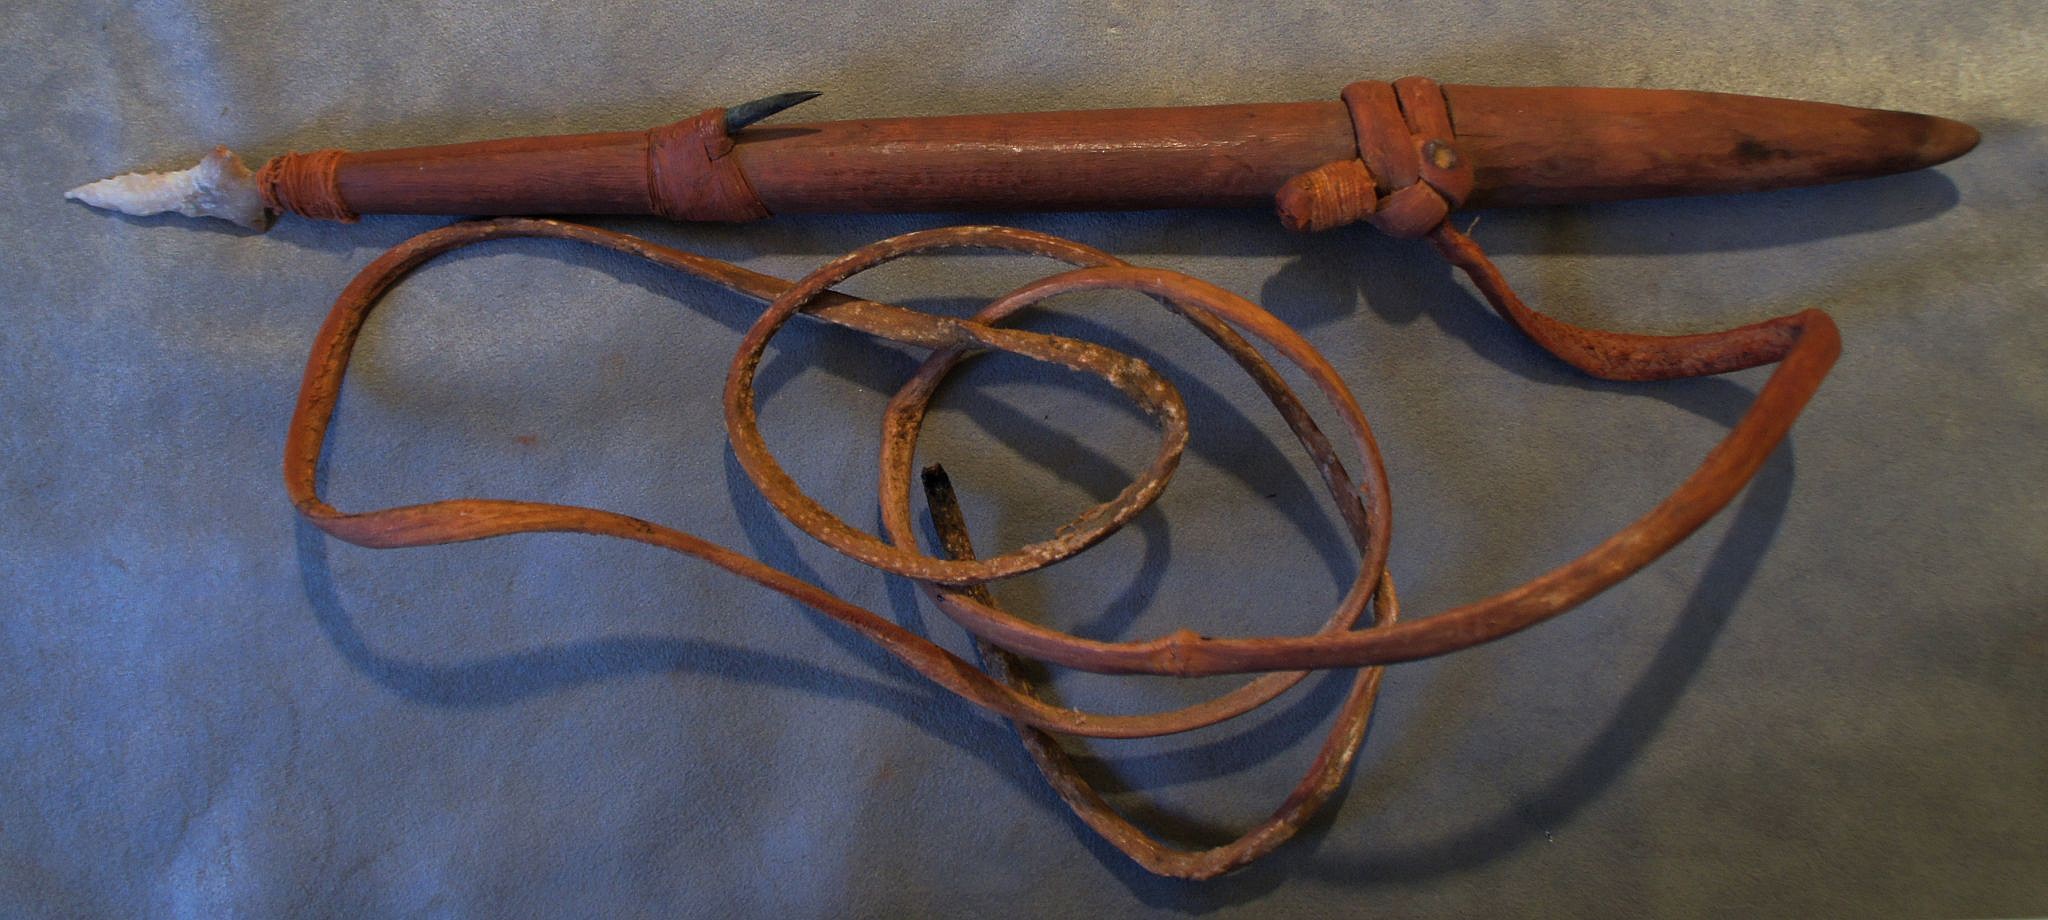 Chile, Large Whaling Harpoon Forepiece with Stone Point, Copper Barb, and Original Leather Line
The harpoon shaft is  maded of carved hardwood with a hole for the knapped stone point, and tapered socketed end.  The leather line is wrapped and knotted around a grooved band to prevent the line from sliding off.  The barb is copper and lashed into a groove.
Media: Wood
Dimensions: Harpoon: 18.5"; Line: approx 4.5"
n6040